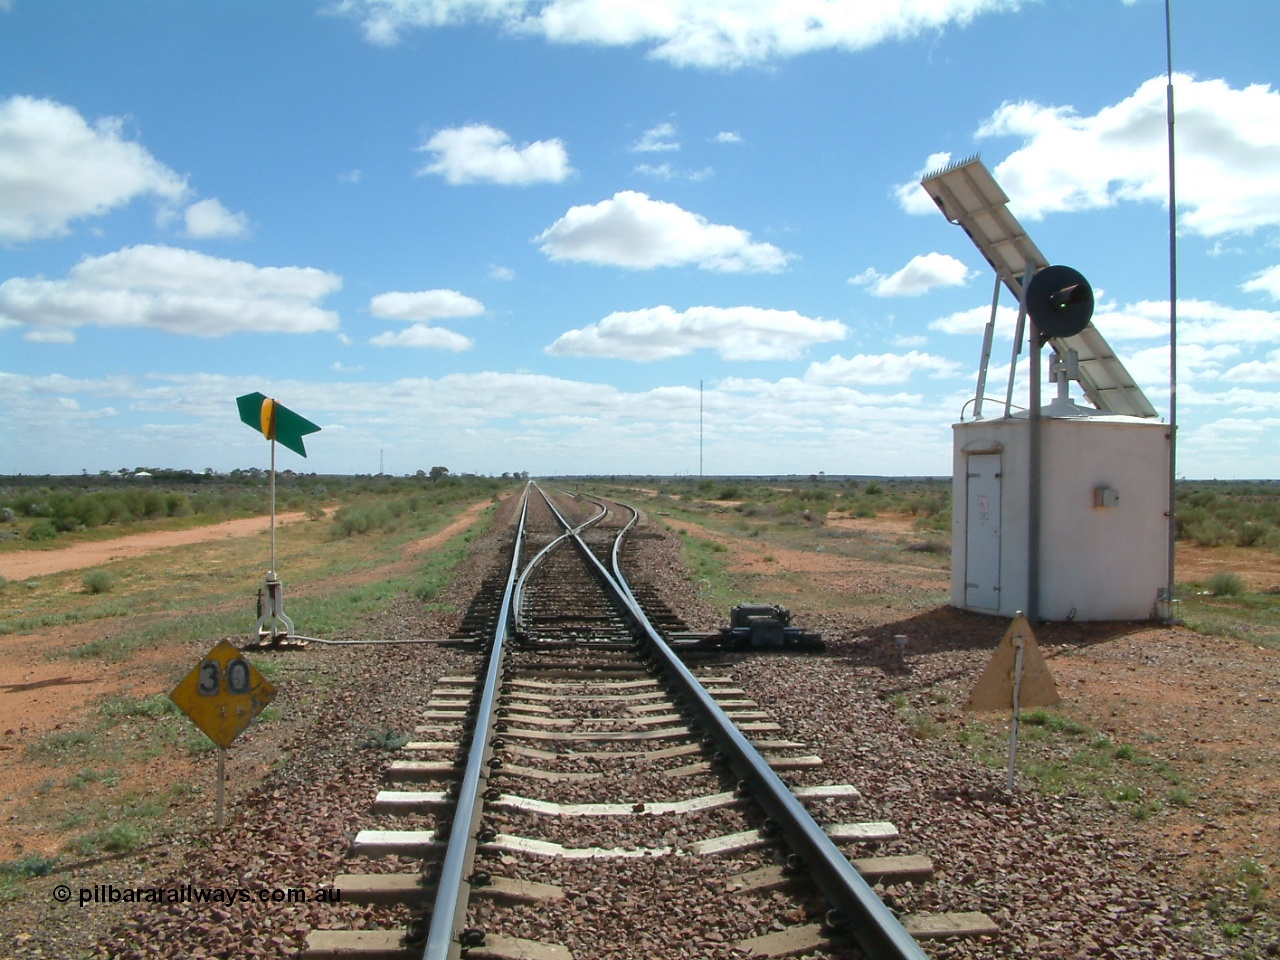 030415 135207
Kingoonya, located at the 426.5 km looking west along the Trans Australian Railway shows 1800 metre long loop on the right, 30 km/h speed restriction and interlocking hut, the town is located over on the left. [url=https://goo.gl/maps/7TMcikXj33EqWvyCA]GeoData location[/url].
